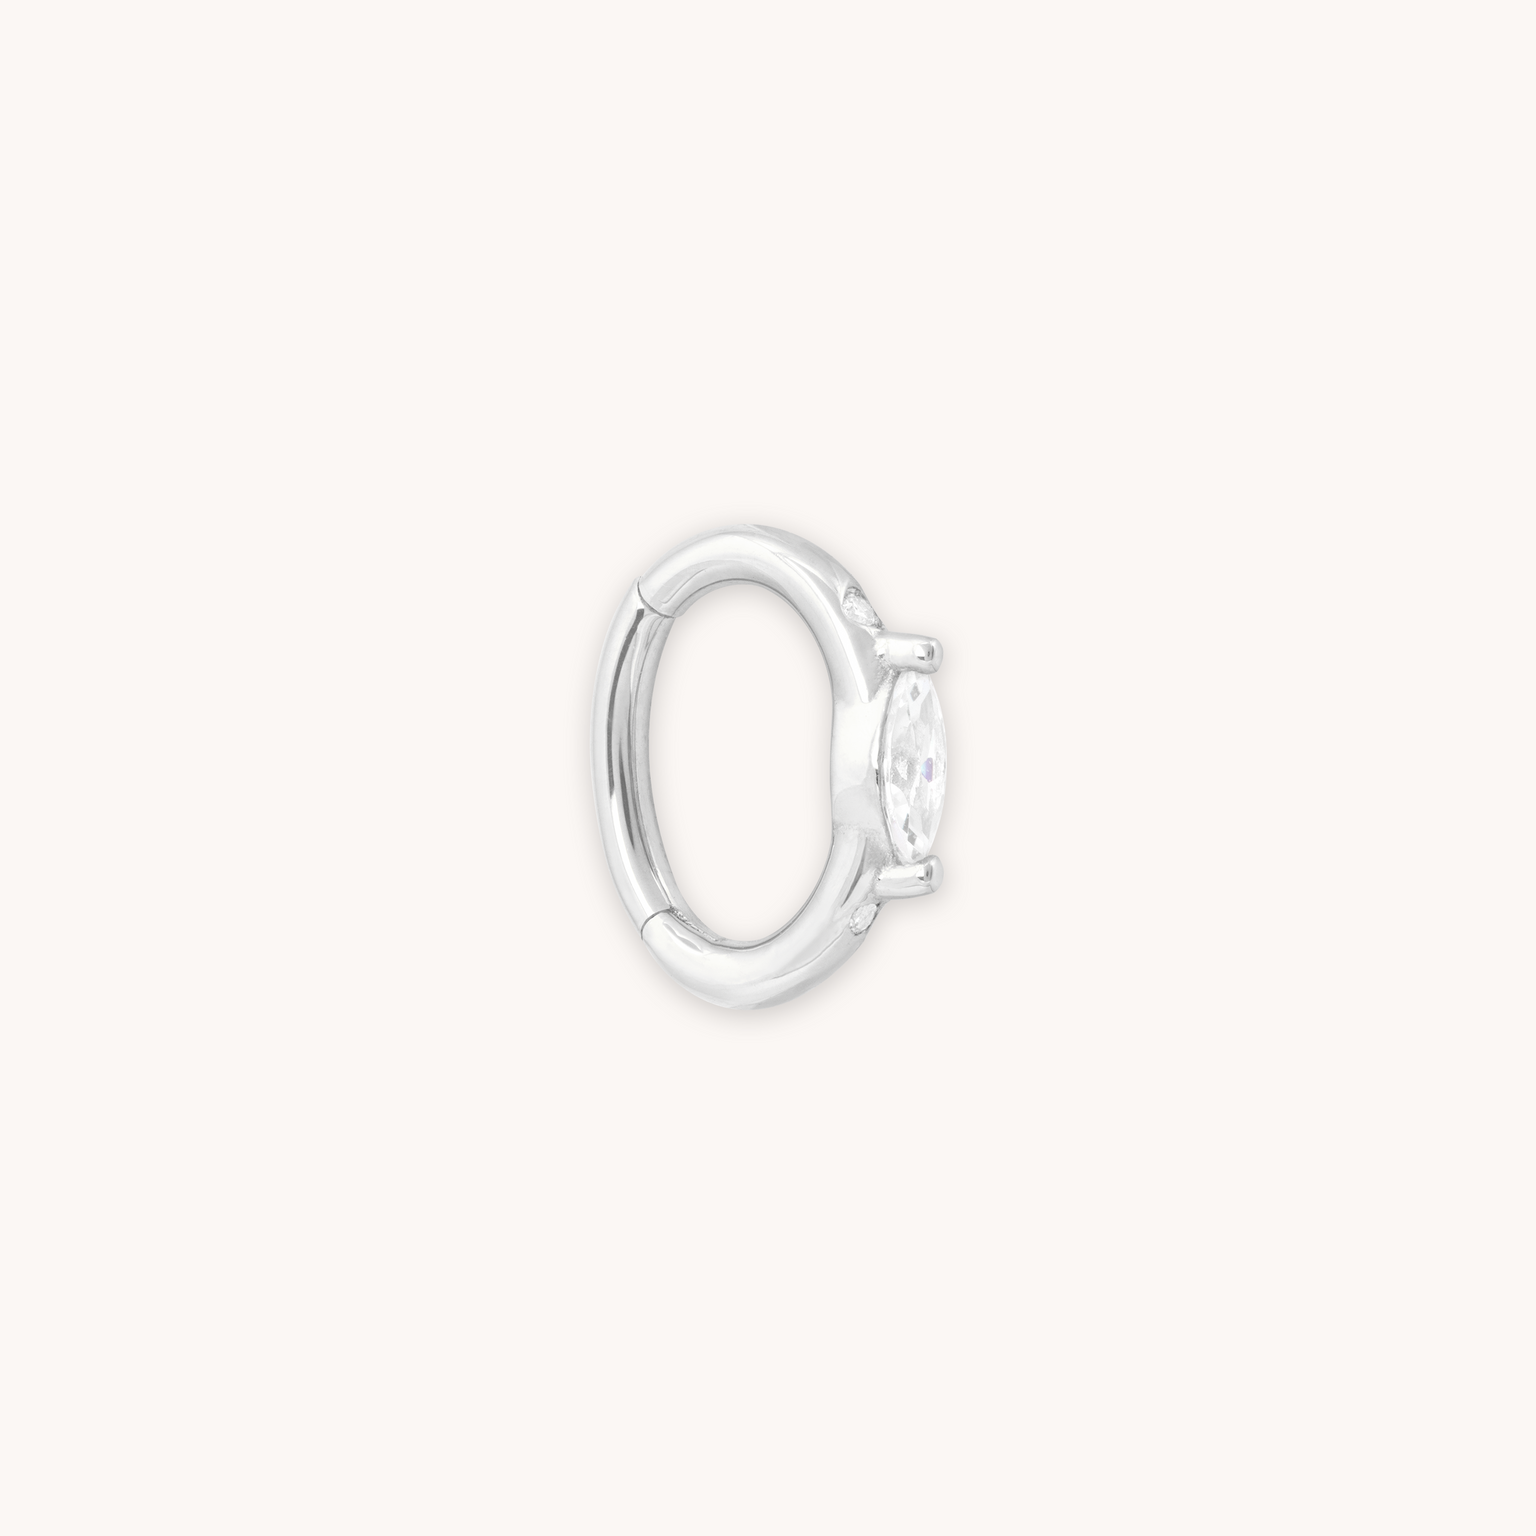 SOLID WHITE GOLD MARQUISE PIERCING HOOP CUT OUT